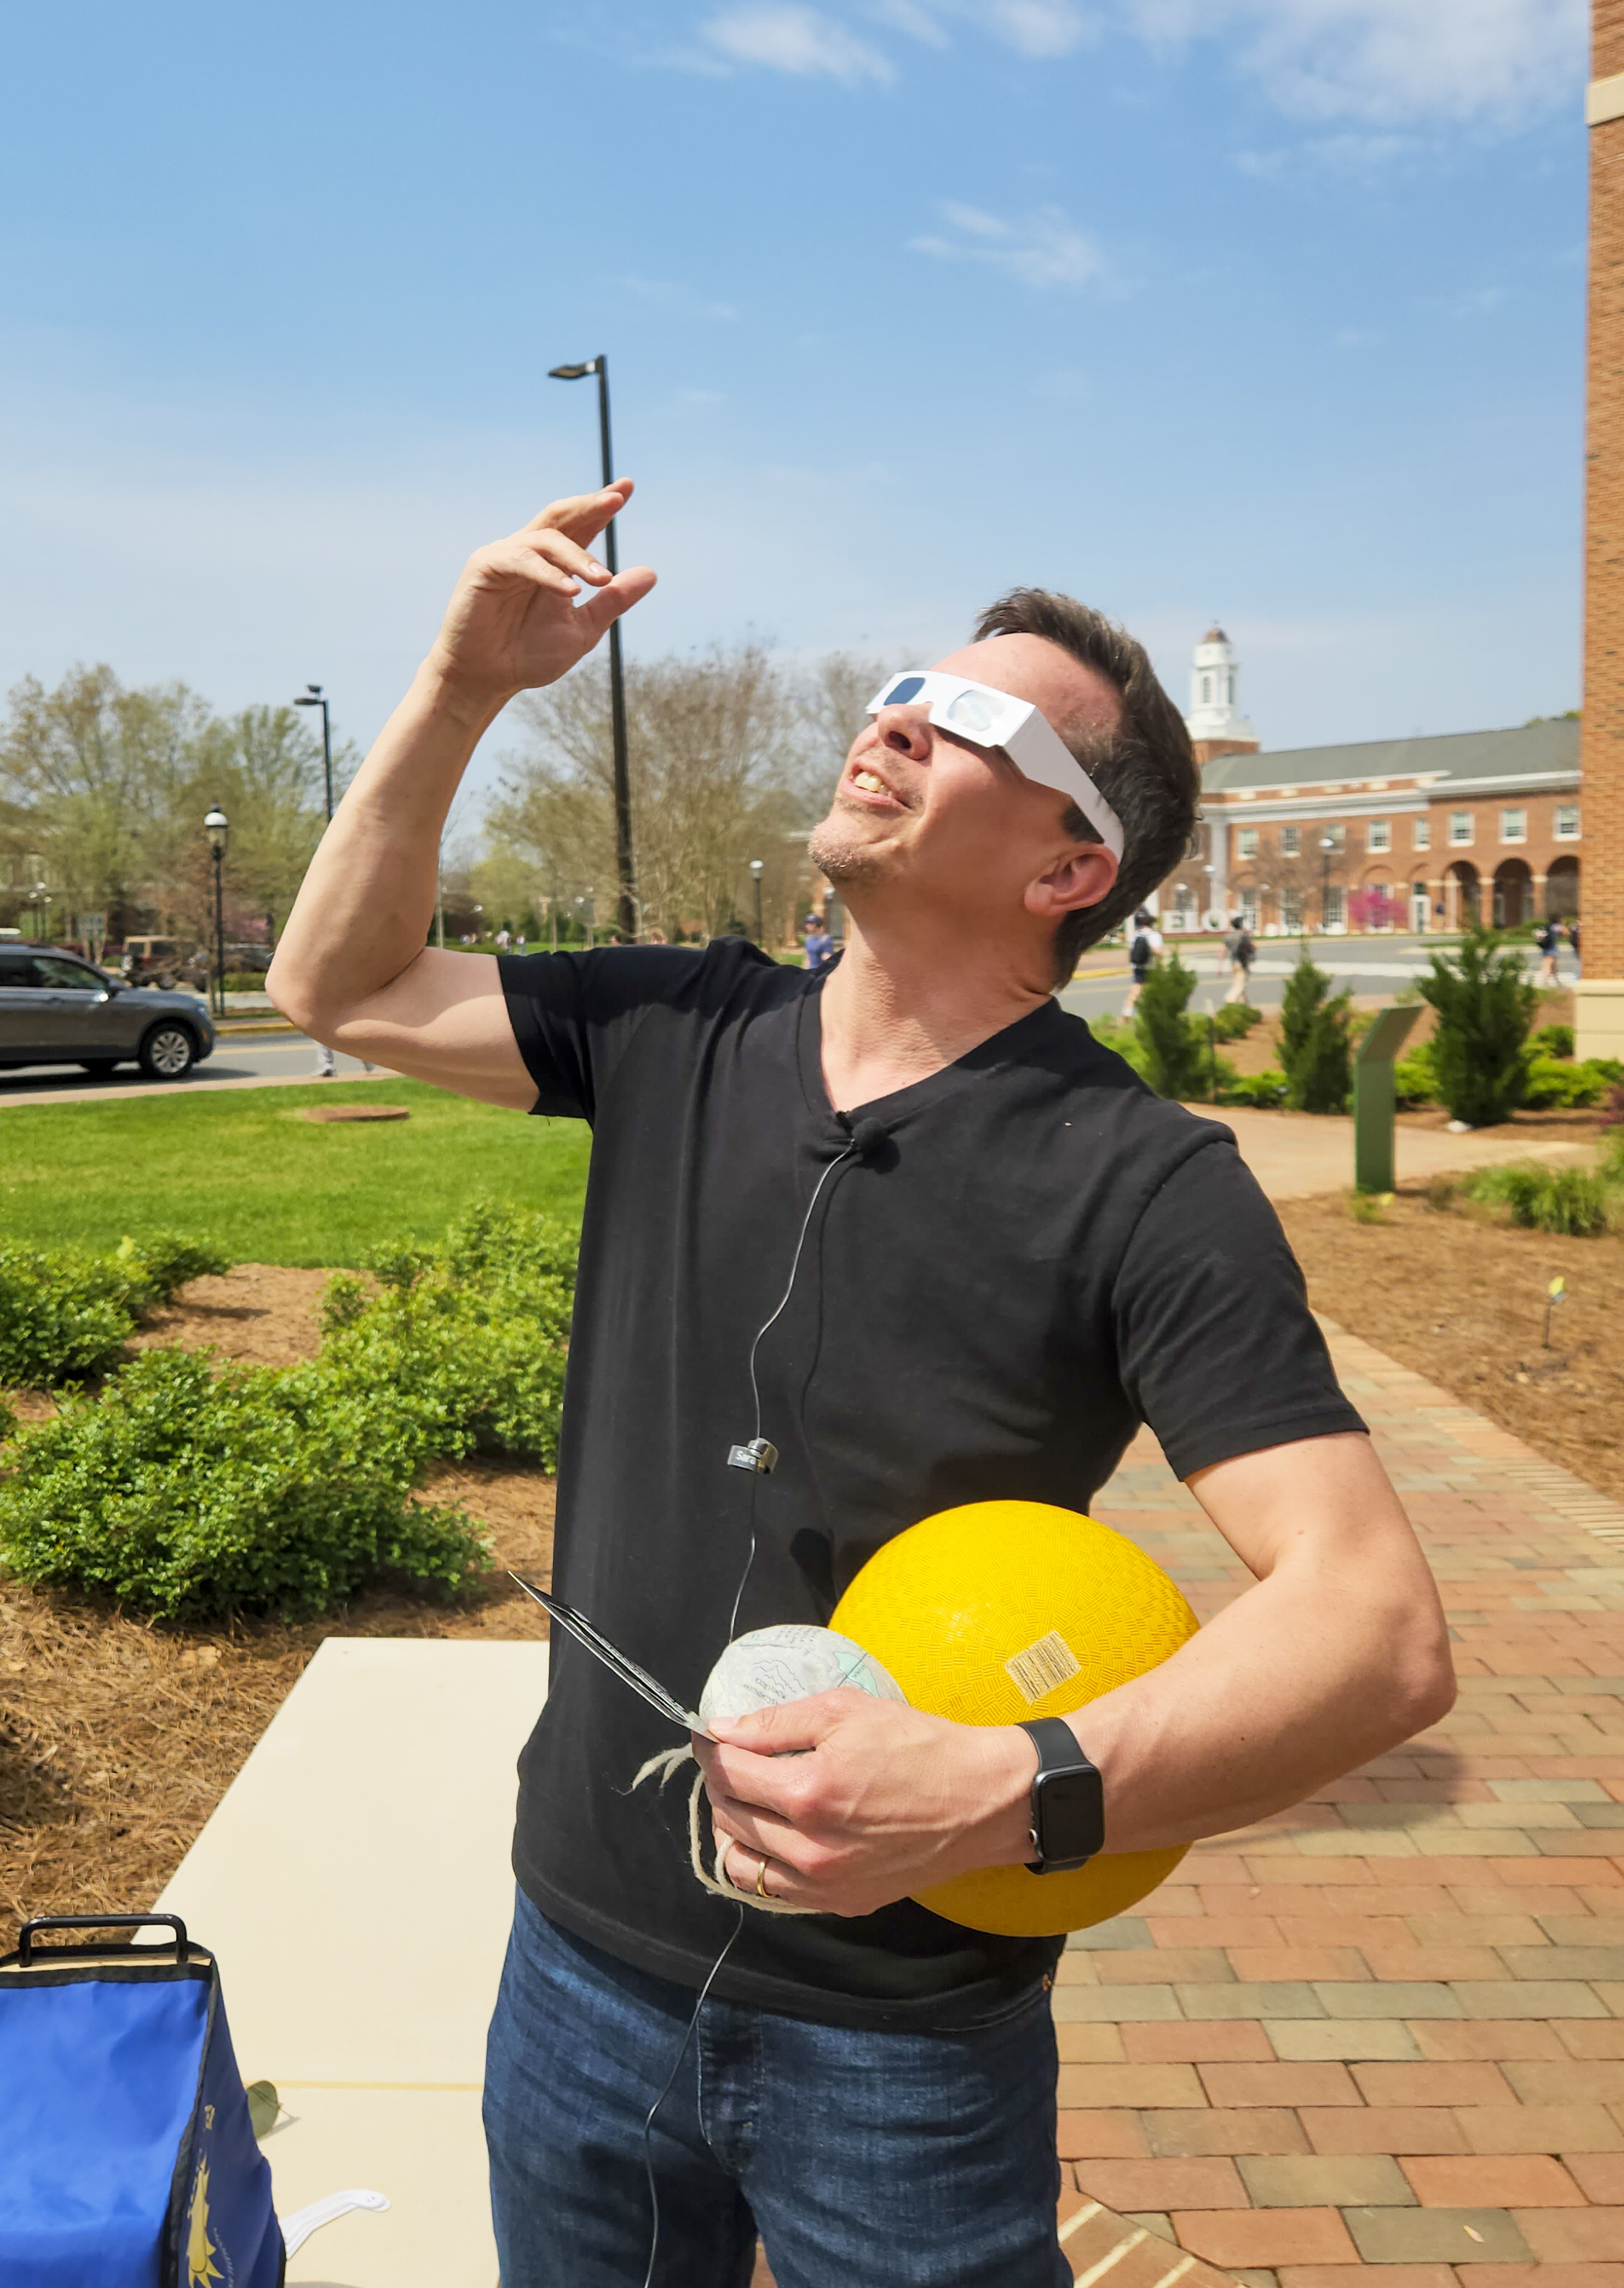 Tony Crider wearing eclipse glasses, holding yellow and white balls, pointing skyward